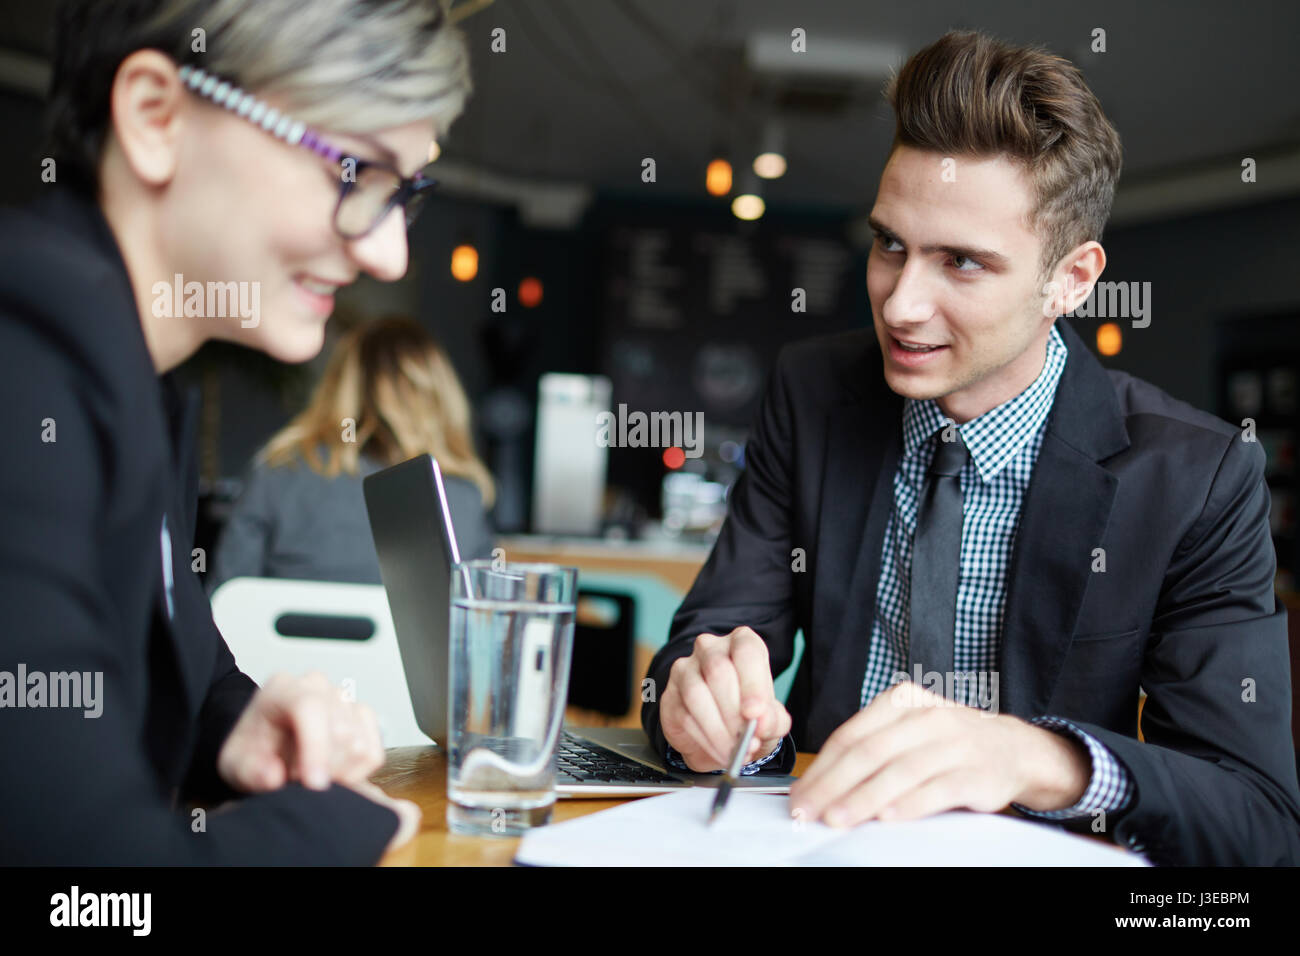 Discussing working plan Stock Photo